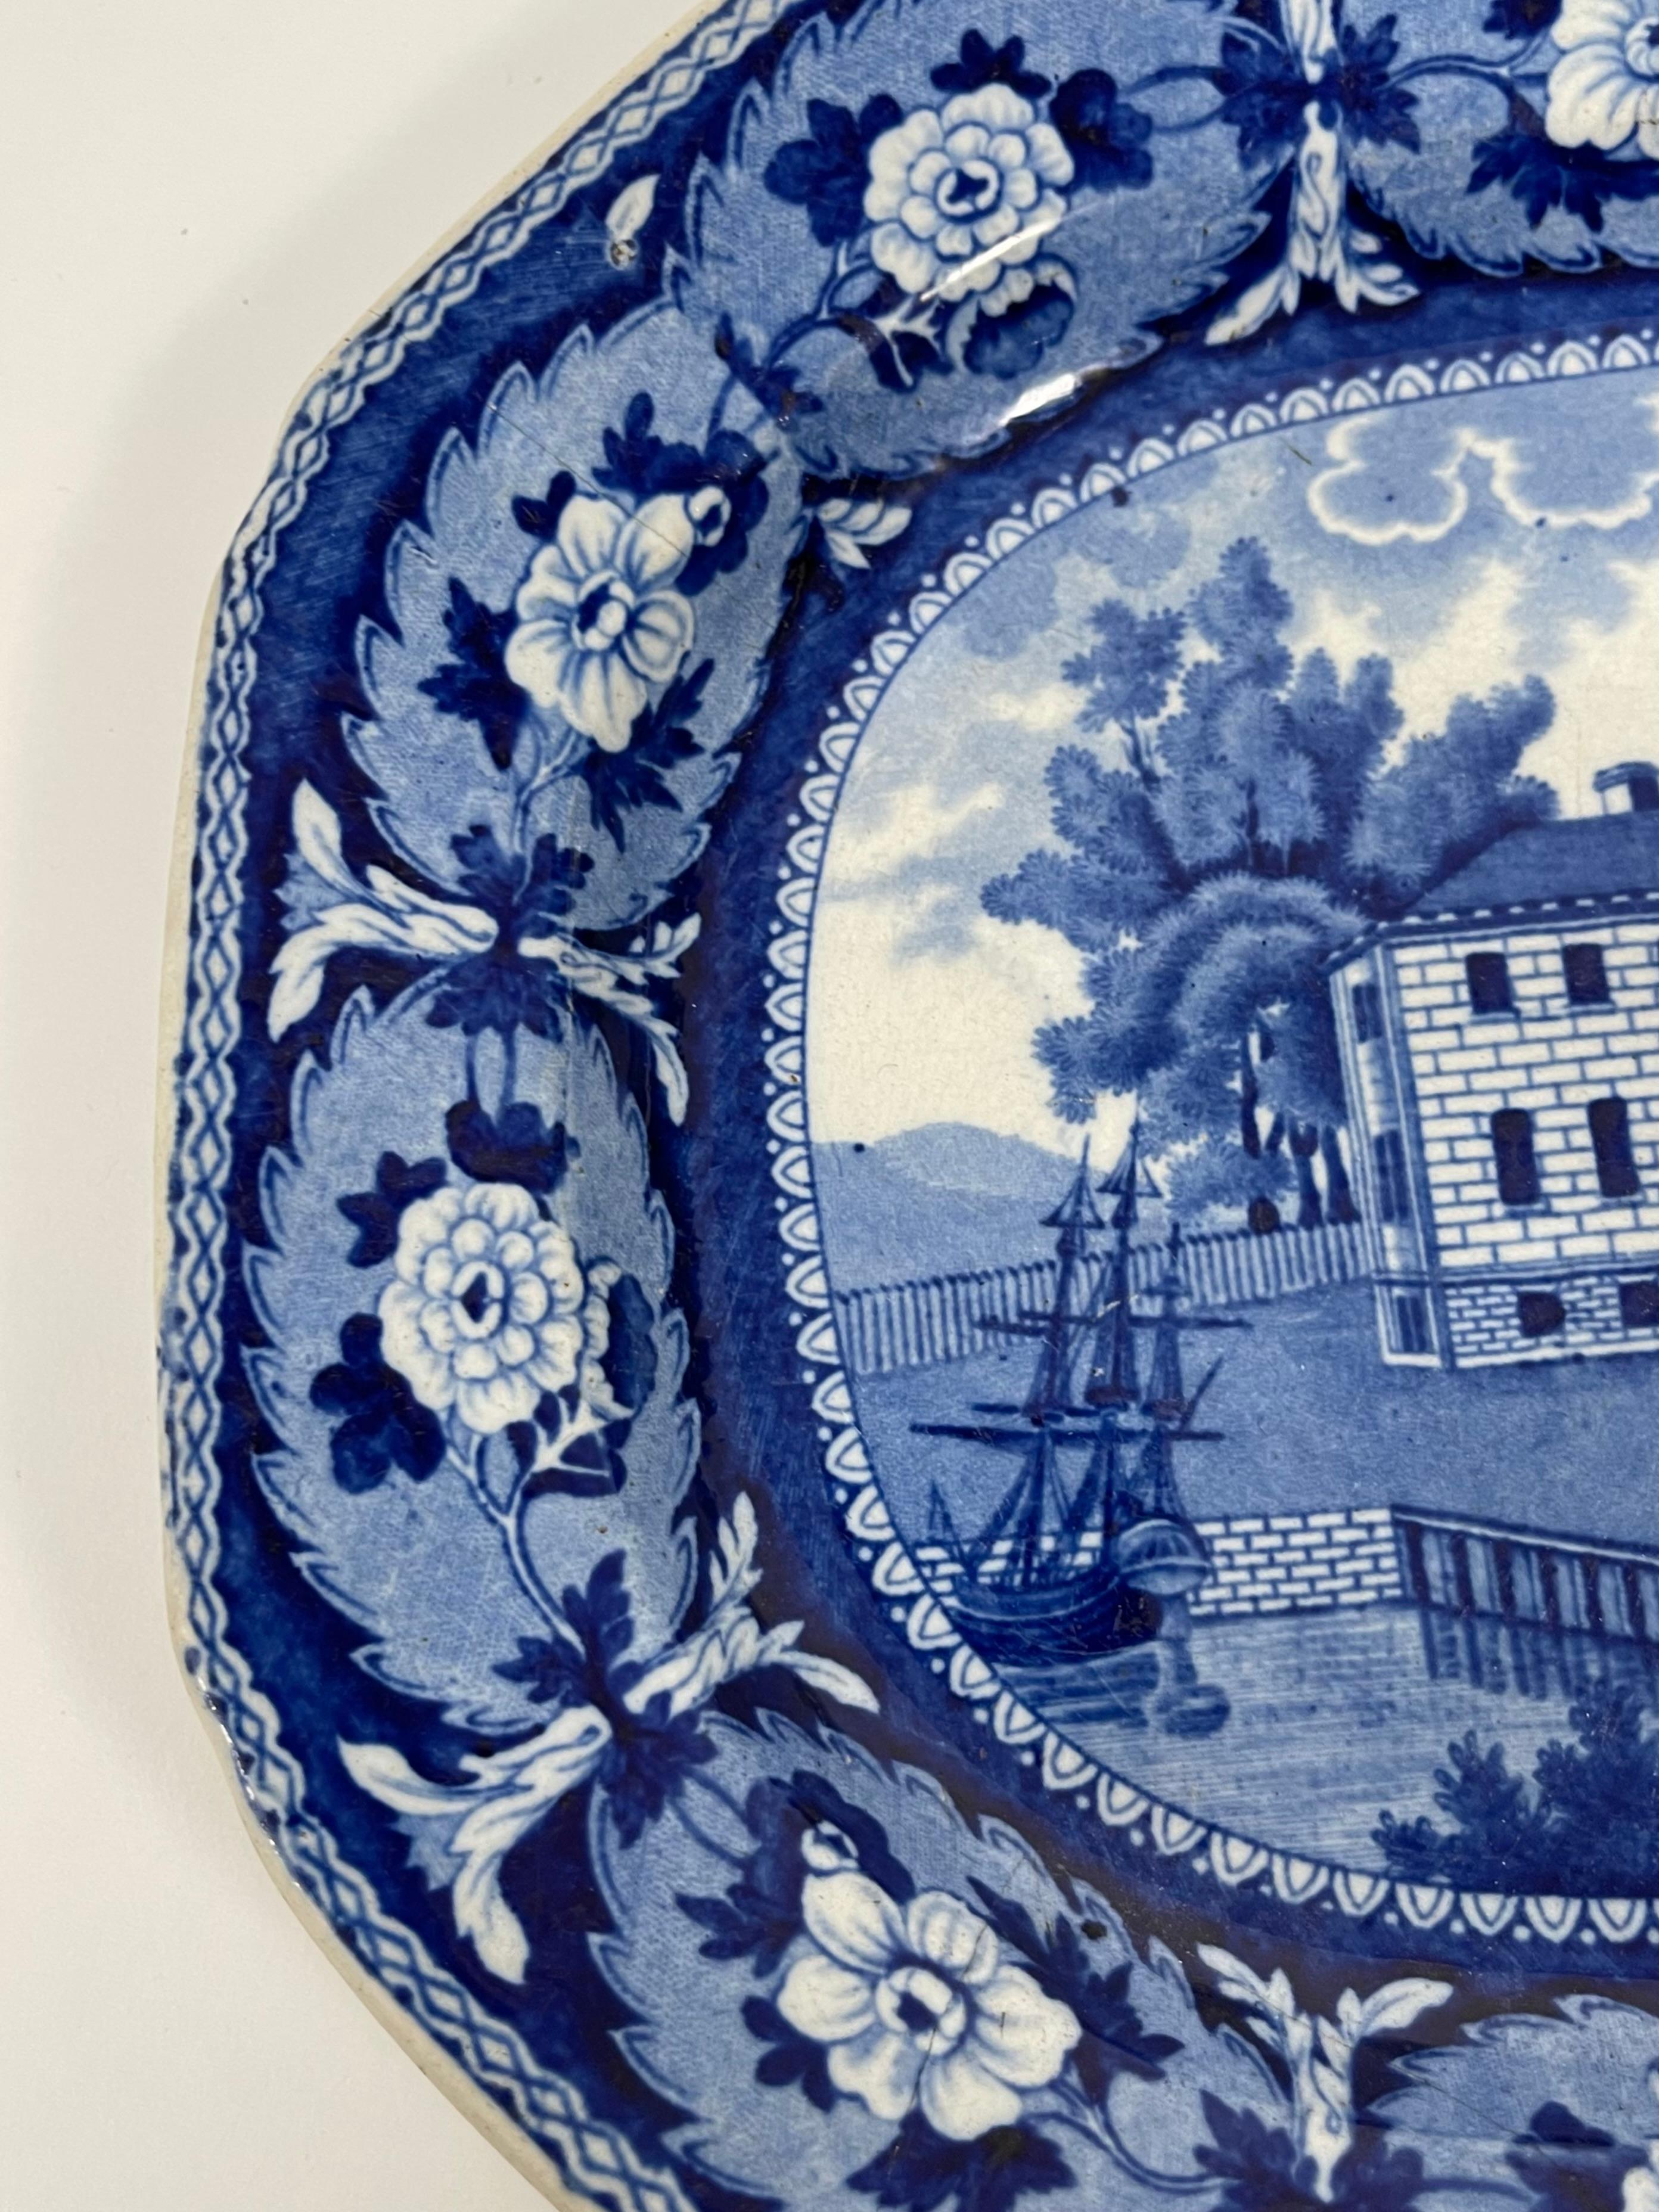 Earthenware 19th Century Blue and White Staffordshire Mass General Hospital Platter